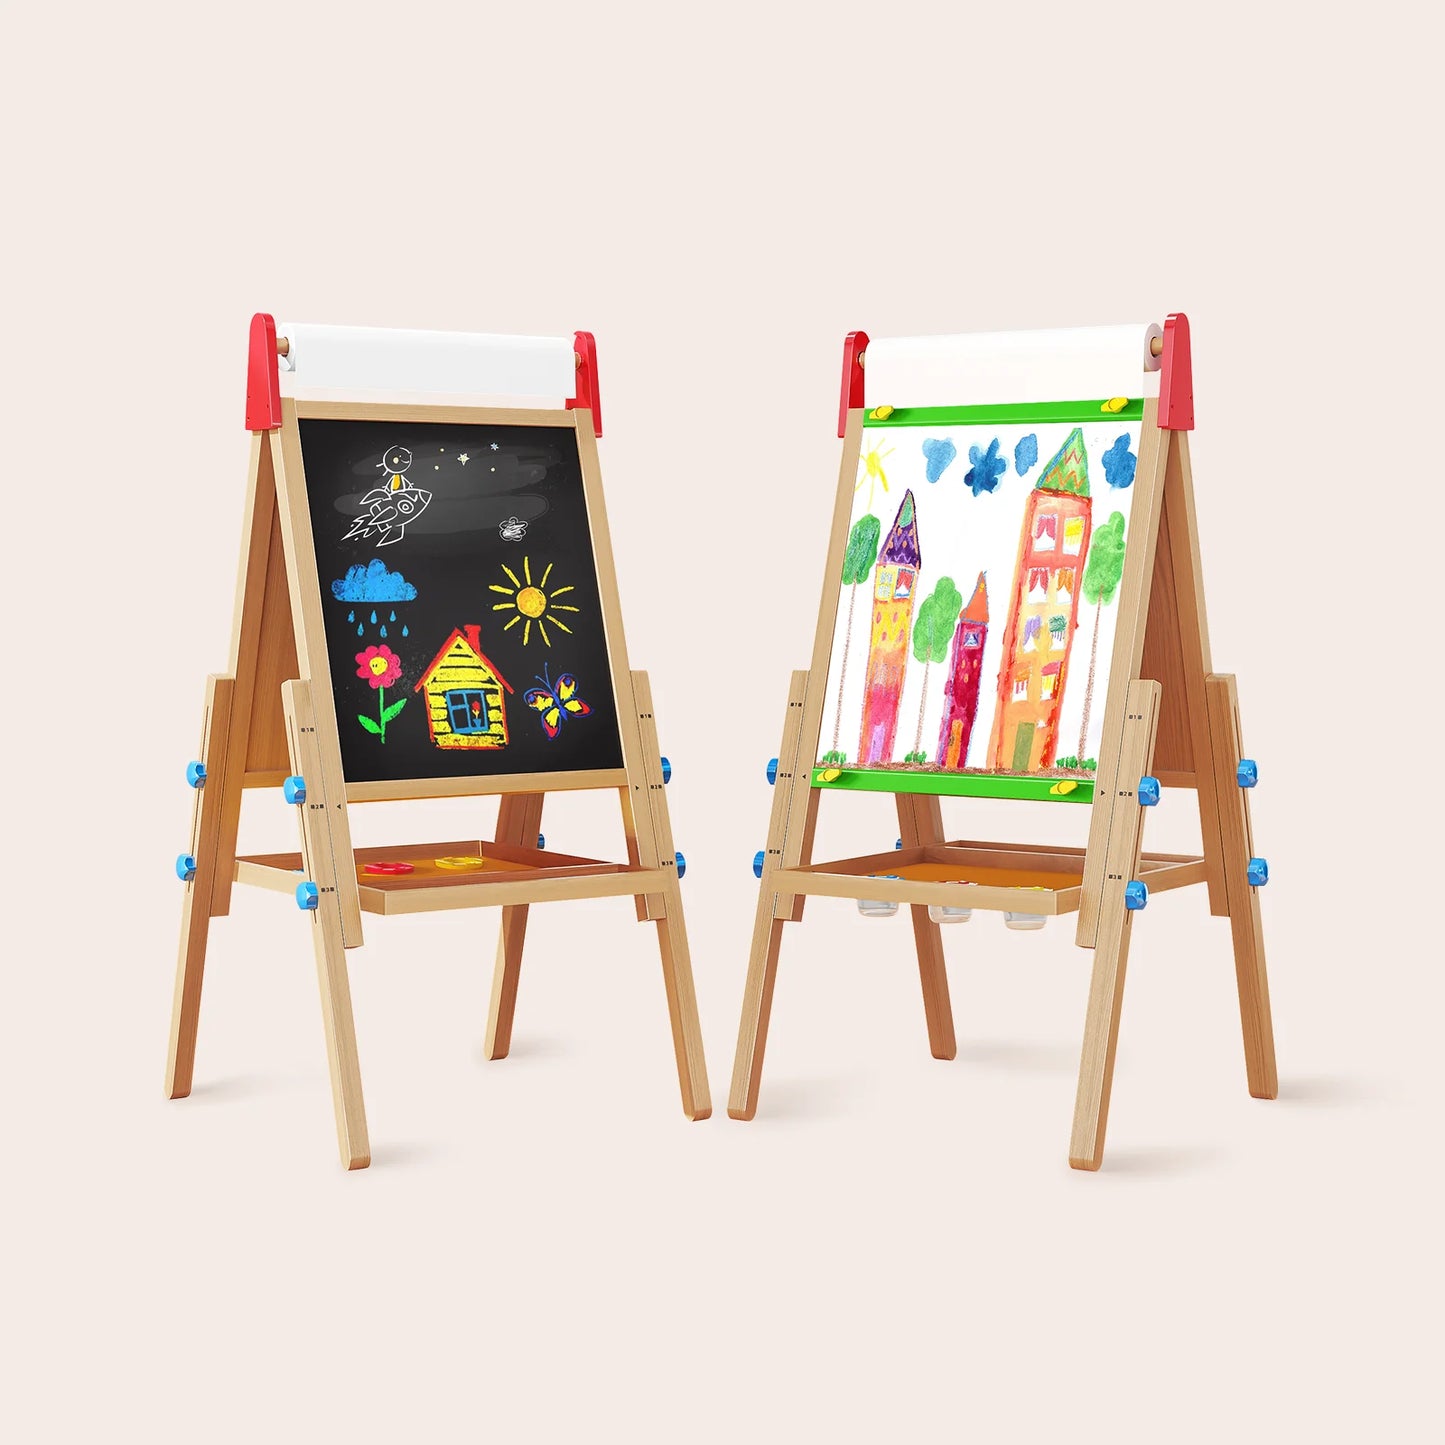 WHITE OR NATURAL EASEL – littlepartyhireuk